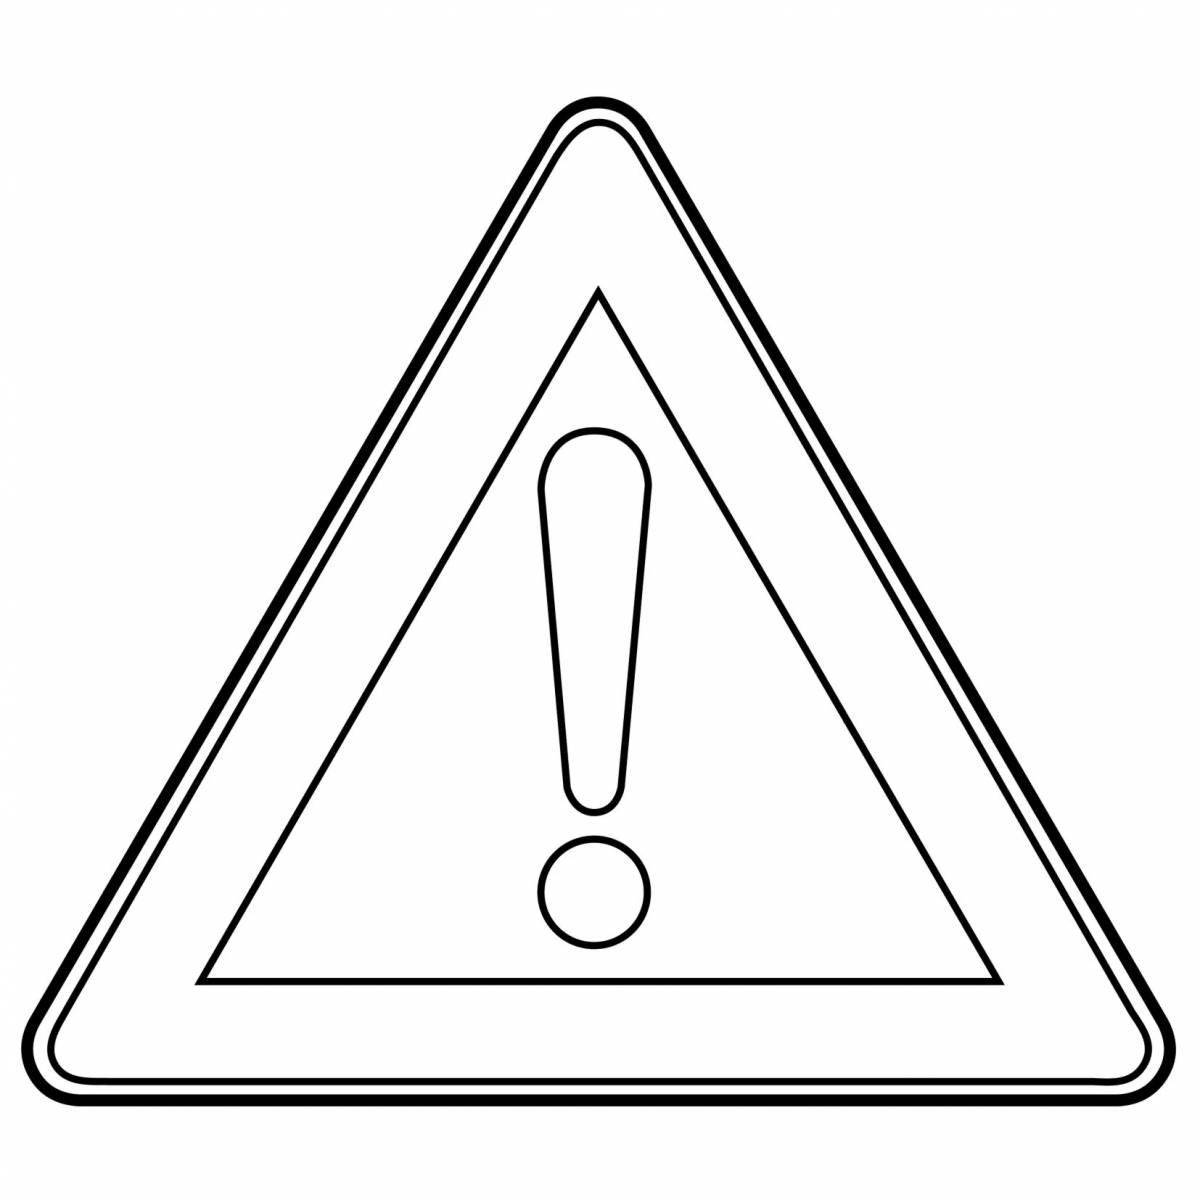 Attractive children's traffic sign caution coloring page